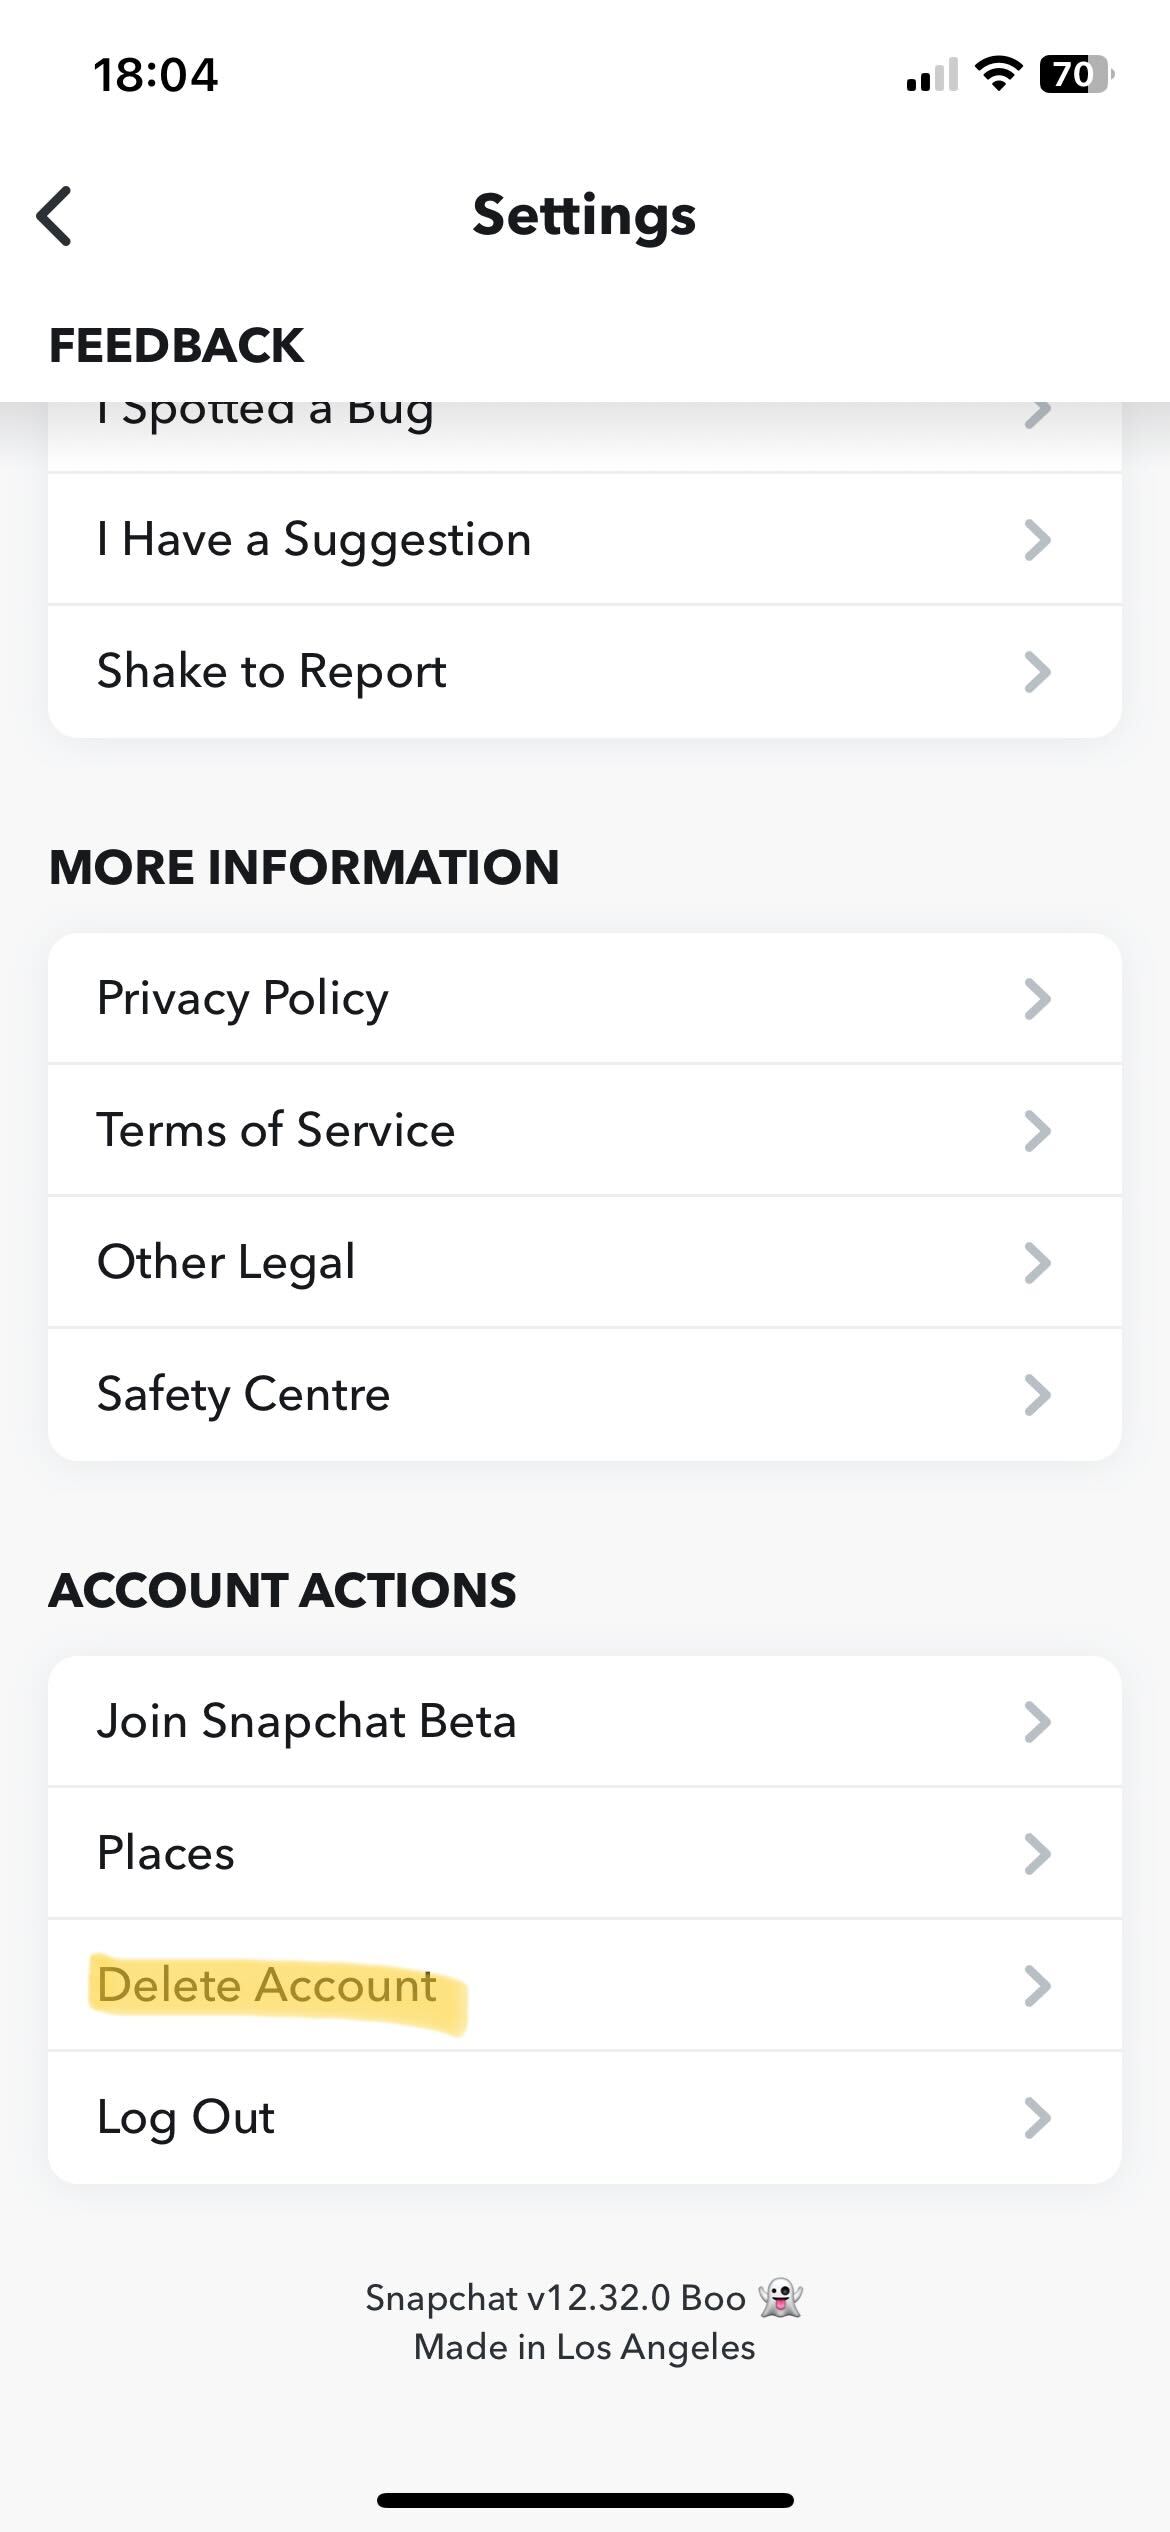 Snapchat settings page on iOS app